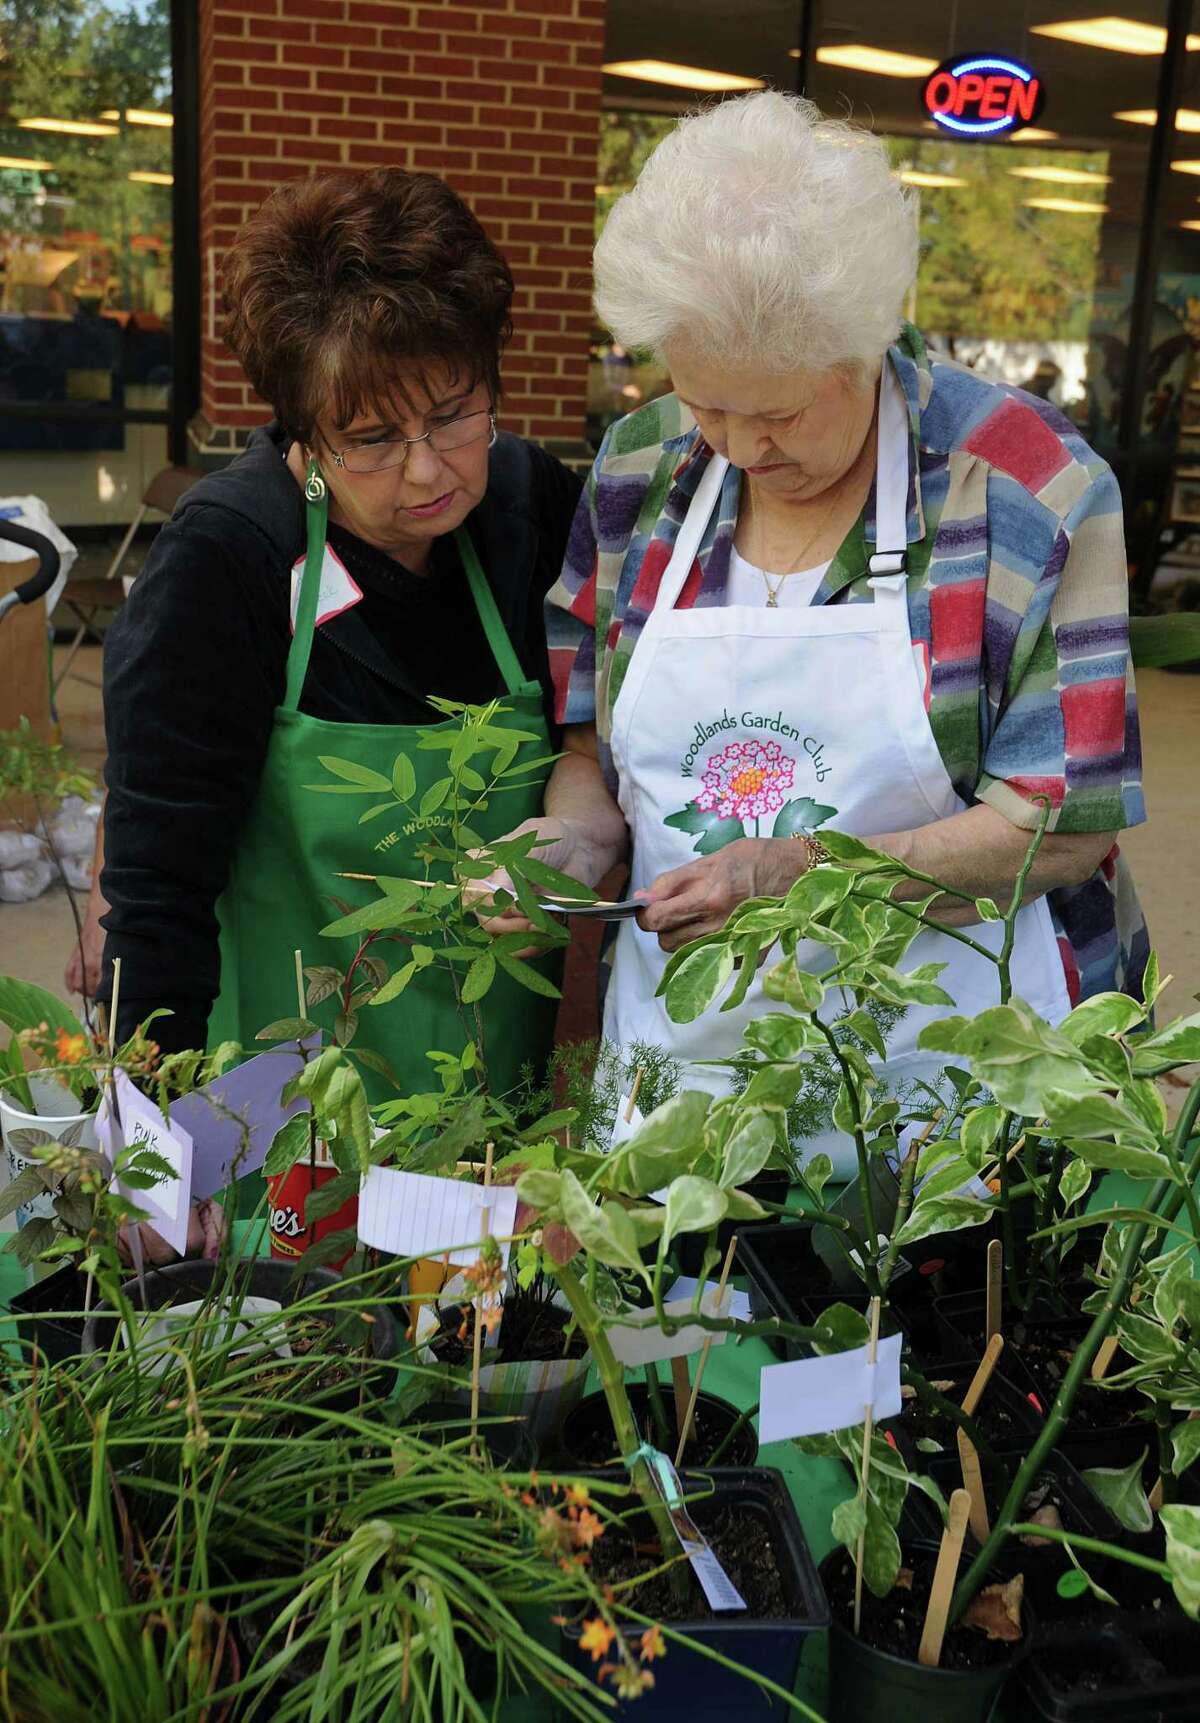 The Woodlands Garden Club members Mary Vacek and Khris Brown check a plant brochure for a guest during The Woodlands Wildflower Festival, which is hosted at the Cochran's Crossing Shopping Center. The festival is one of many community events in the village.